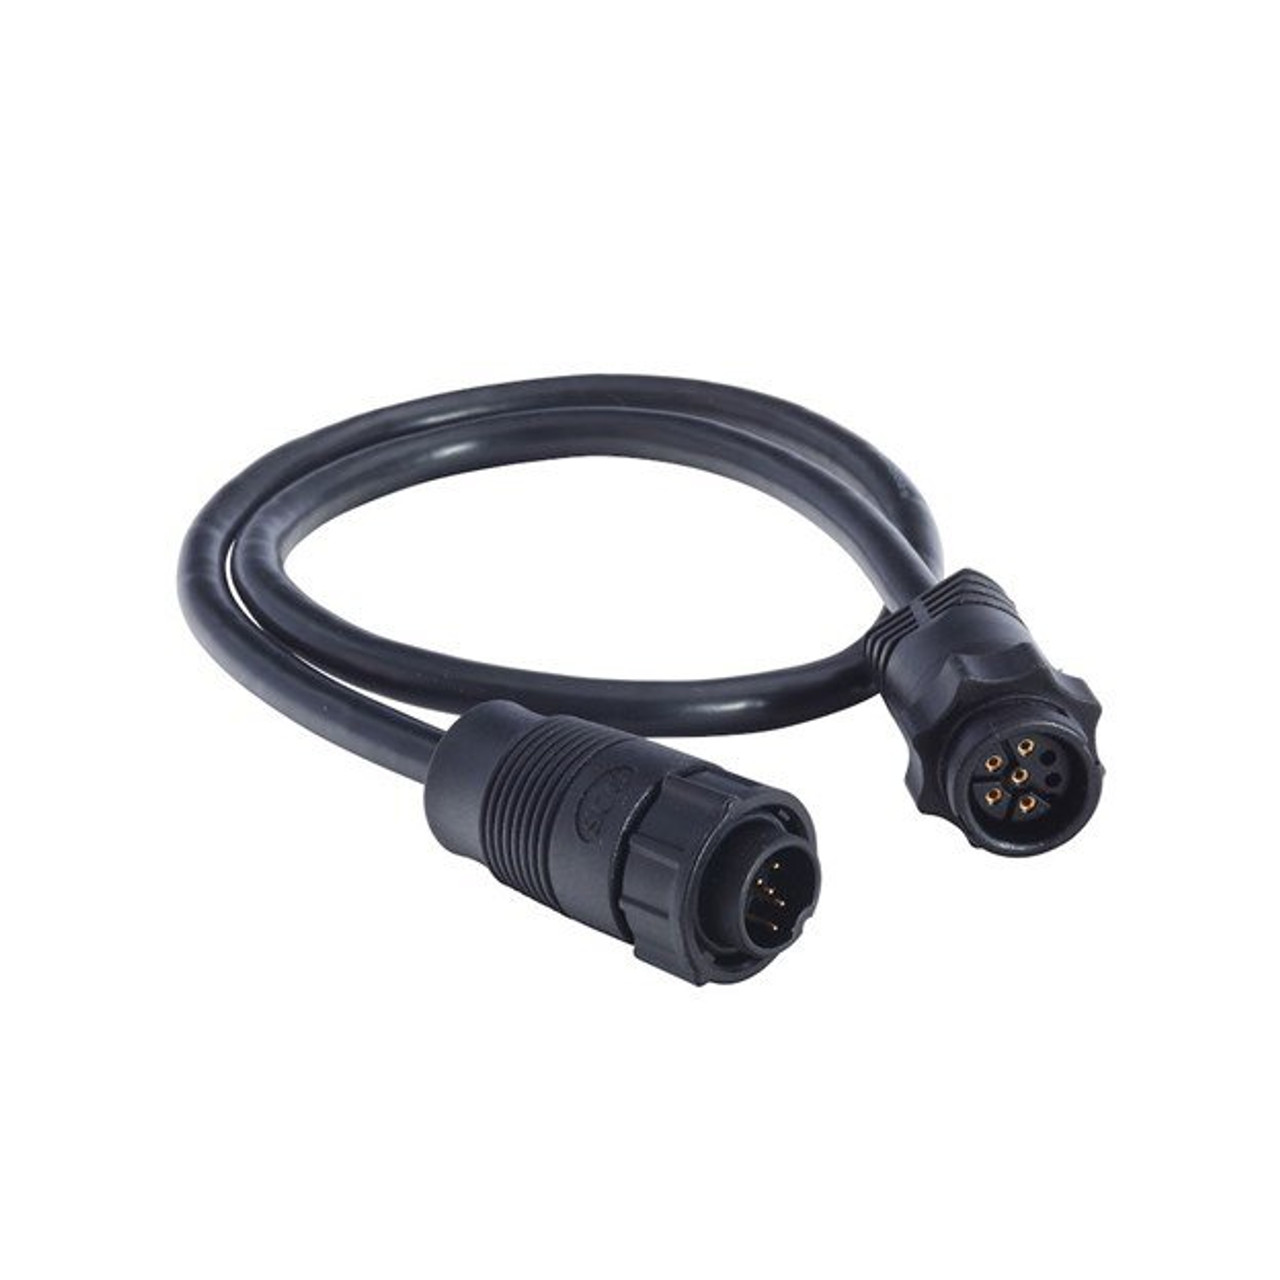 8-pin Transducer to 4-pin Sounder Adapter Cable